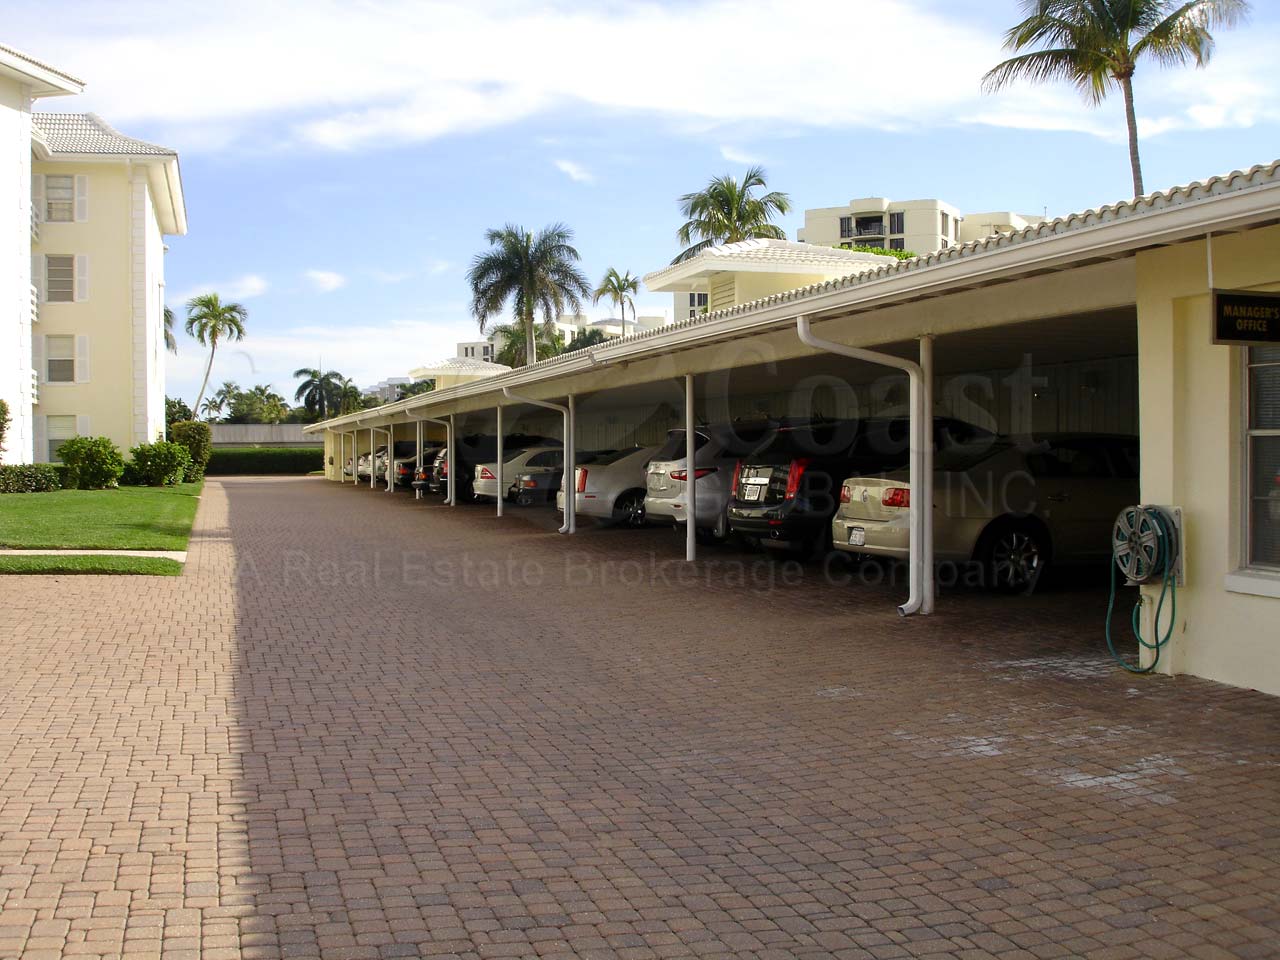 Executive Club Covered Parking